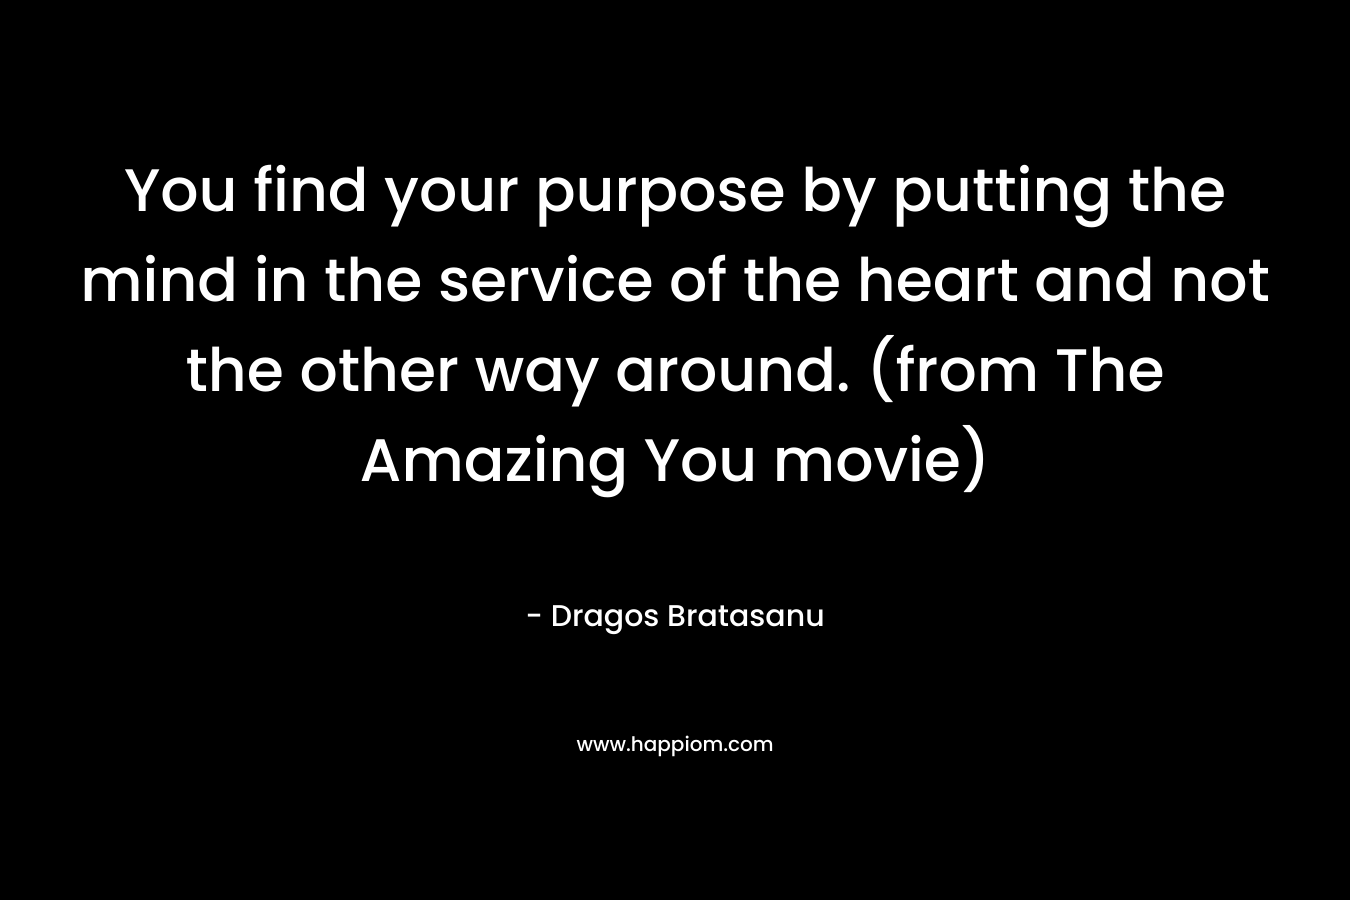 You find your purpose by putting the mind in the service of the heart and not the other way around. (from The Amazing You movie) – Dragos Bratasanu